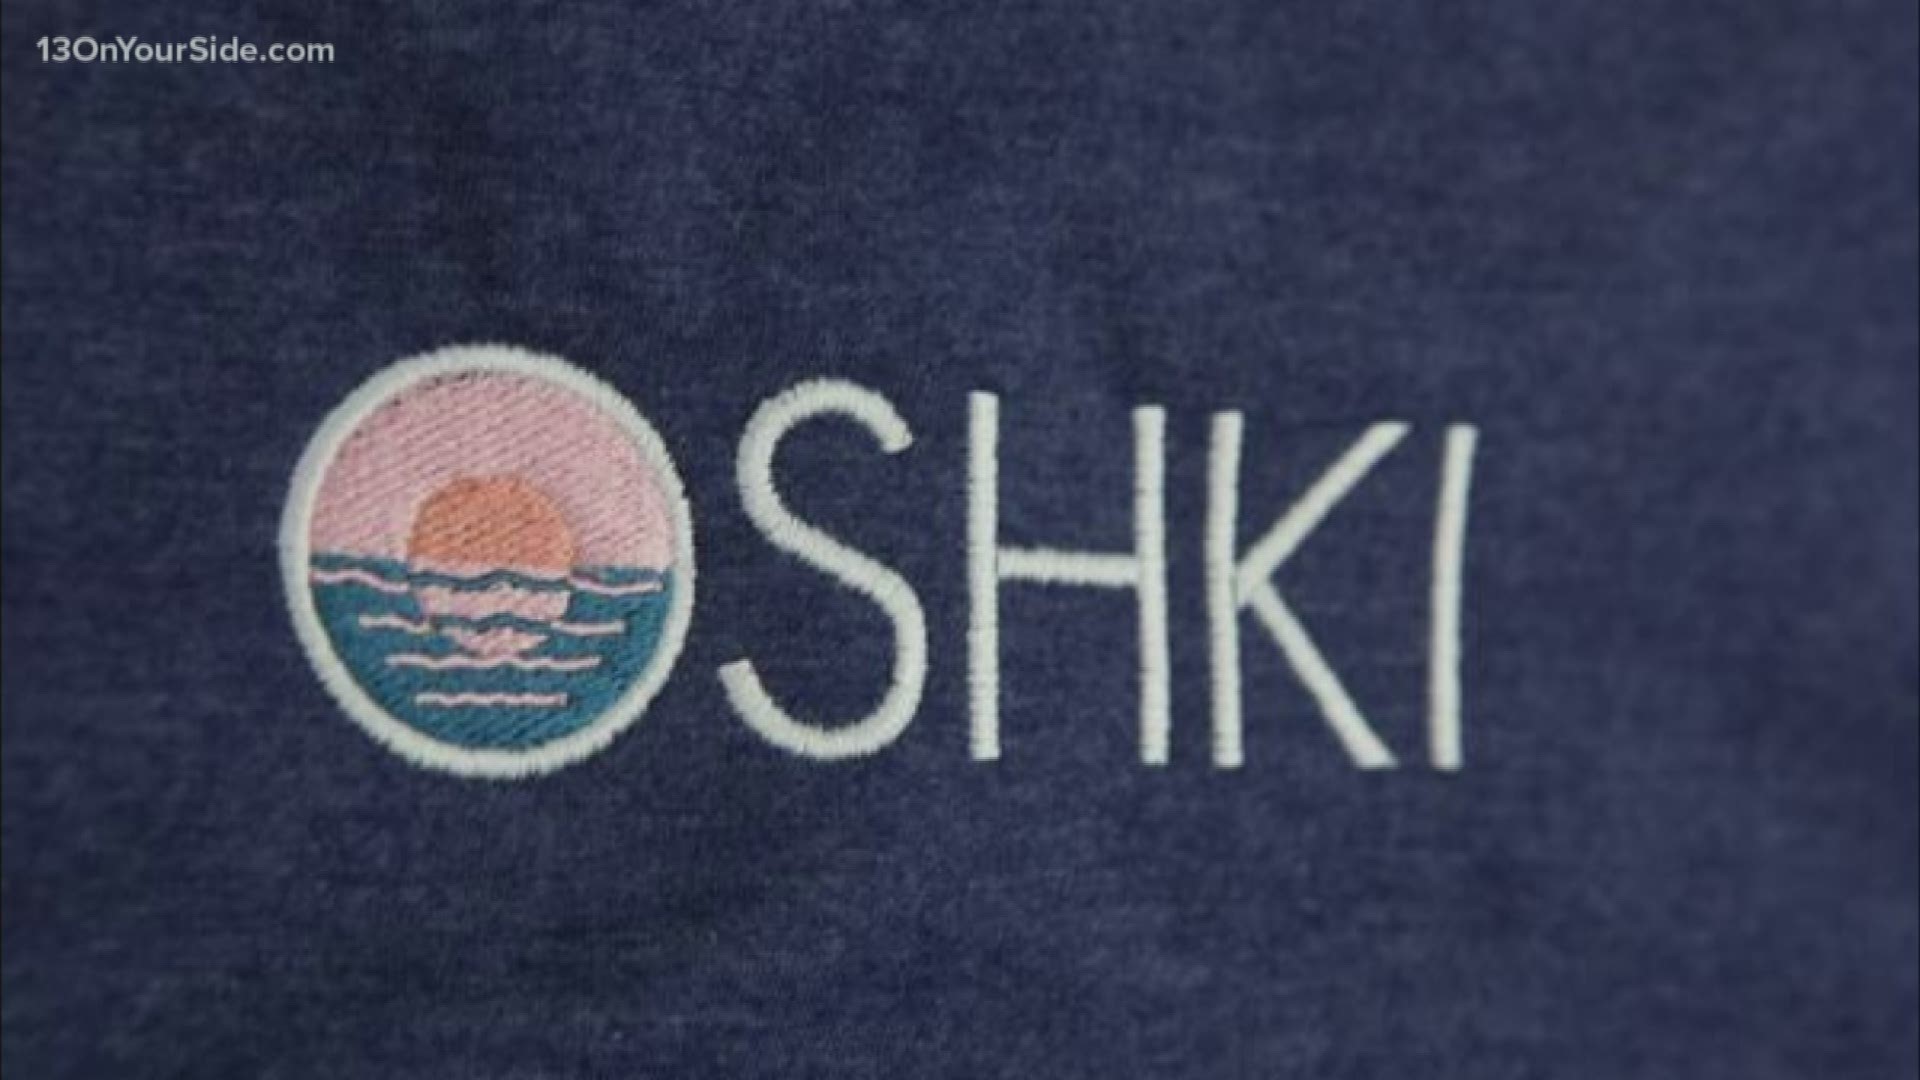 Oshki currently only sells t-shirts, but the company will be expanding the merchandise line soon.